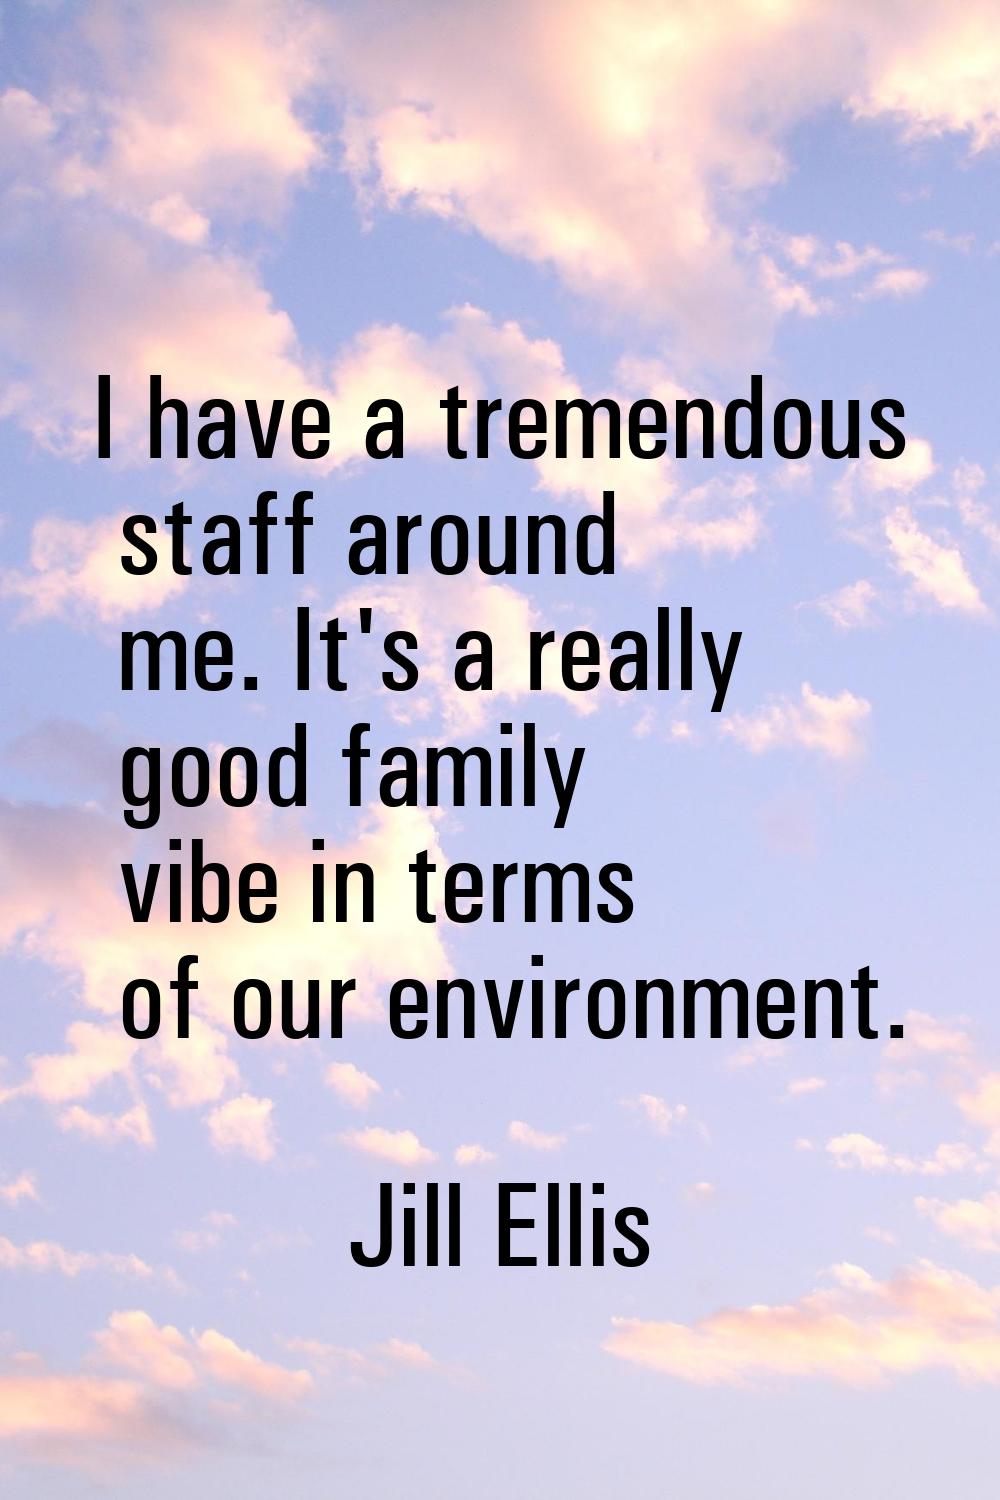 I have a tremendous staff around me. It's a really good family vibe in terms of our environment.